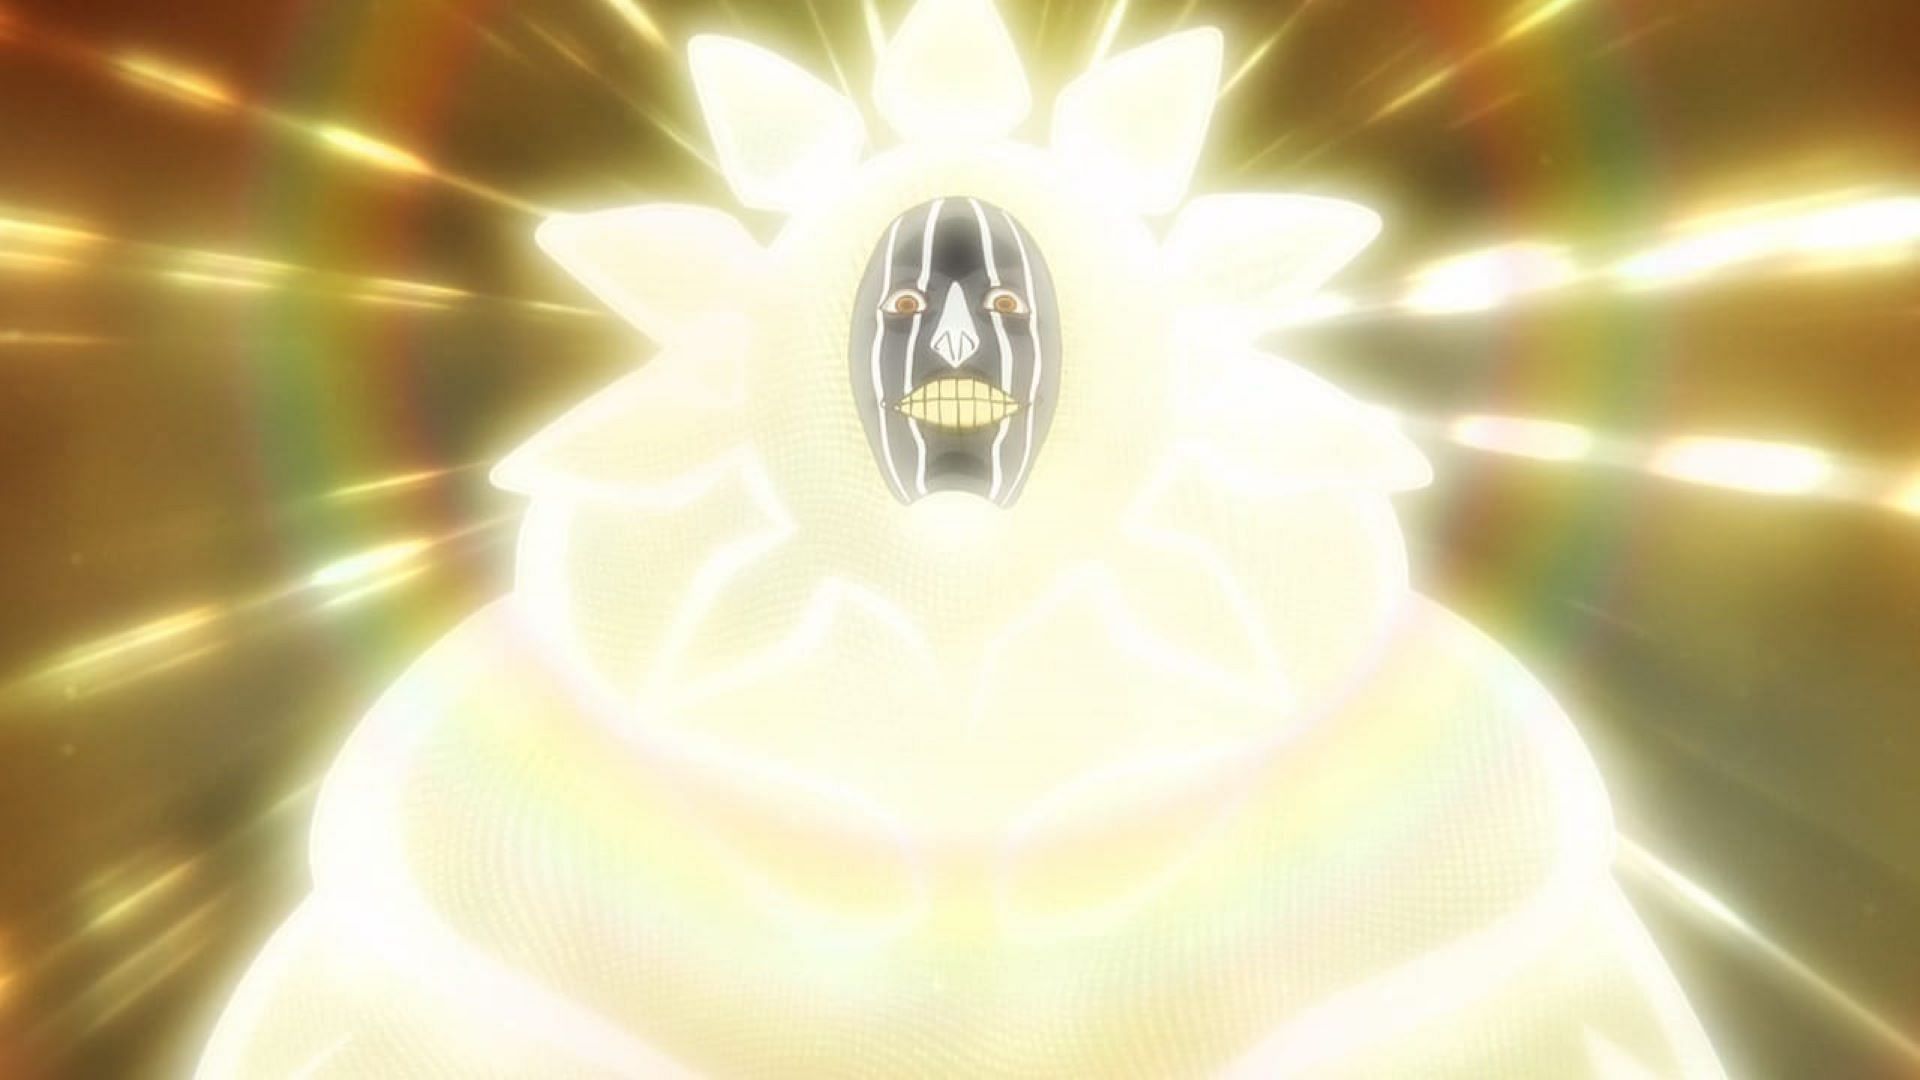 Bleach TYBW episode 22: Yoruichi returns to the Seireitei as Mayuri joins  the battlefield and outsmarts Giselle